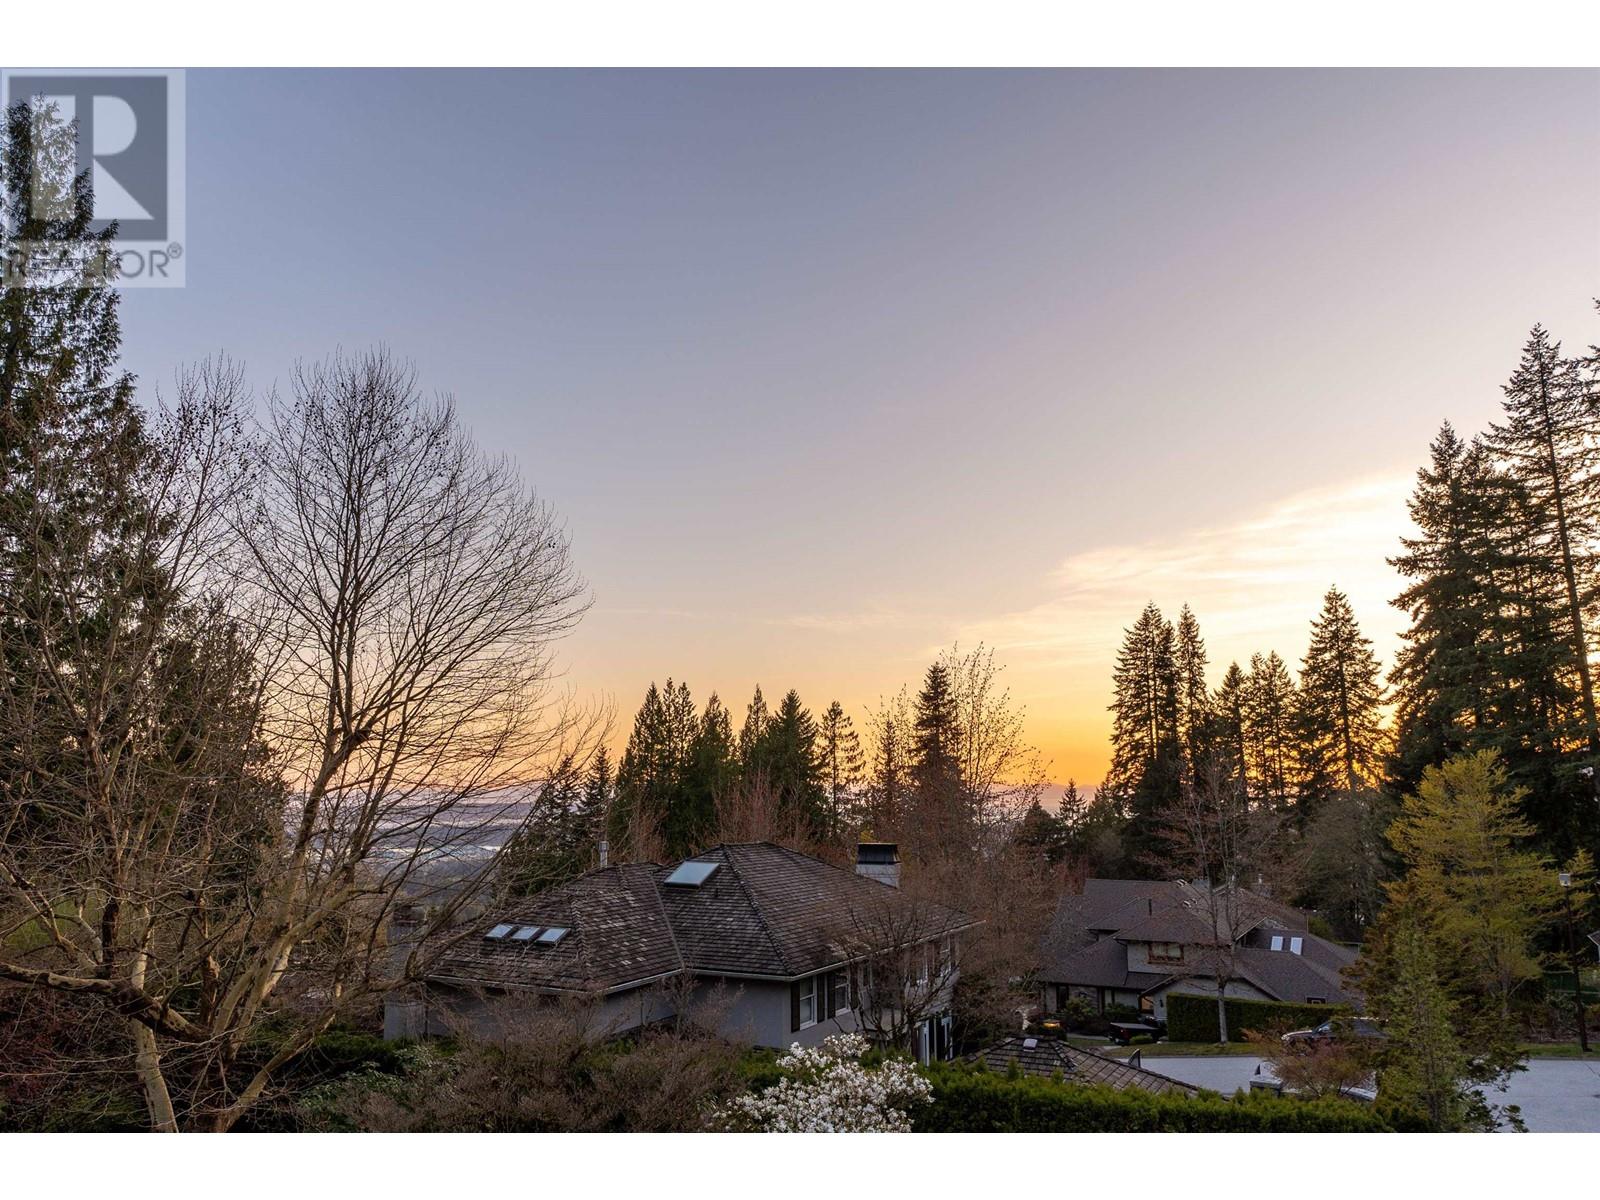 4188 COVENTRY WAY, North Vancouver